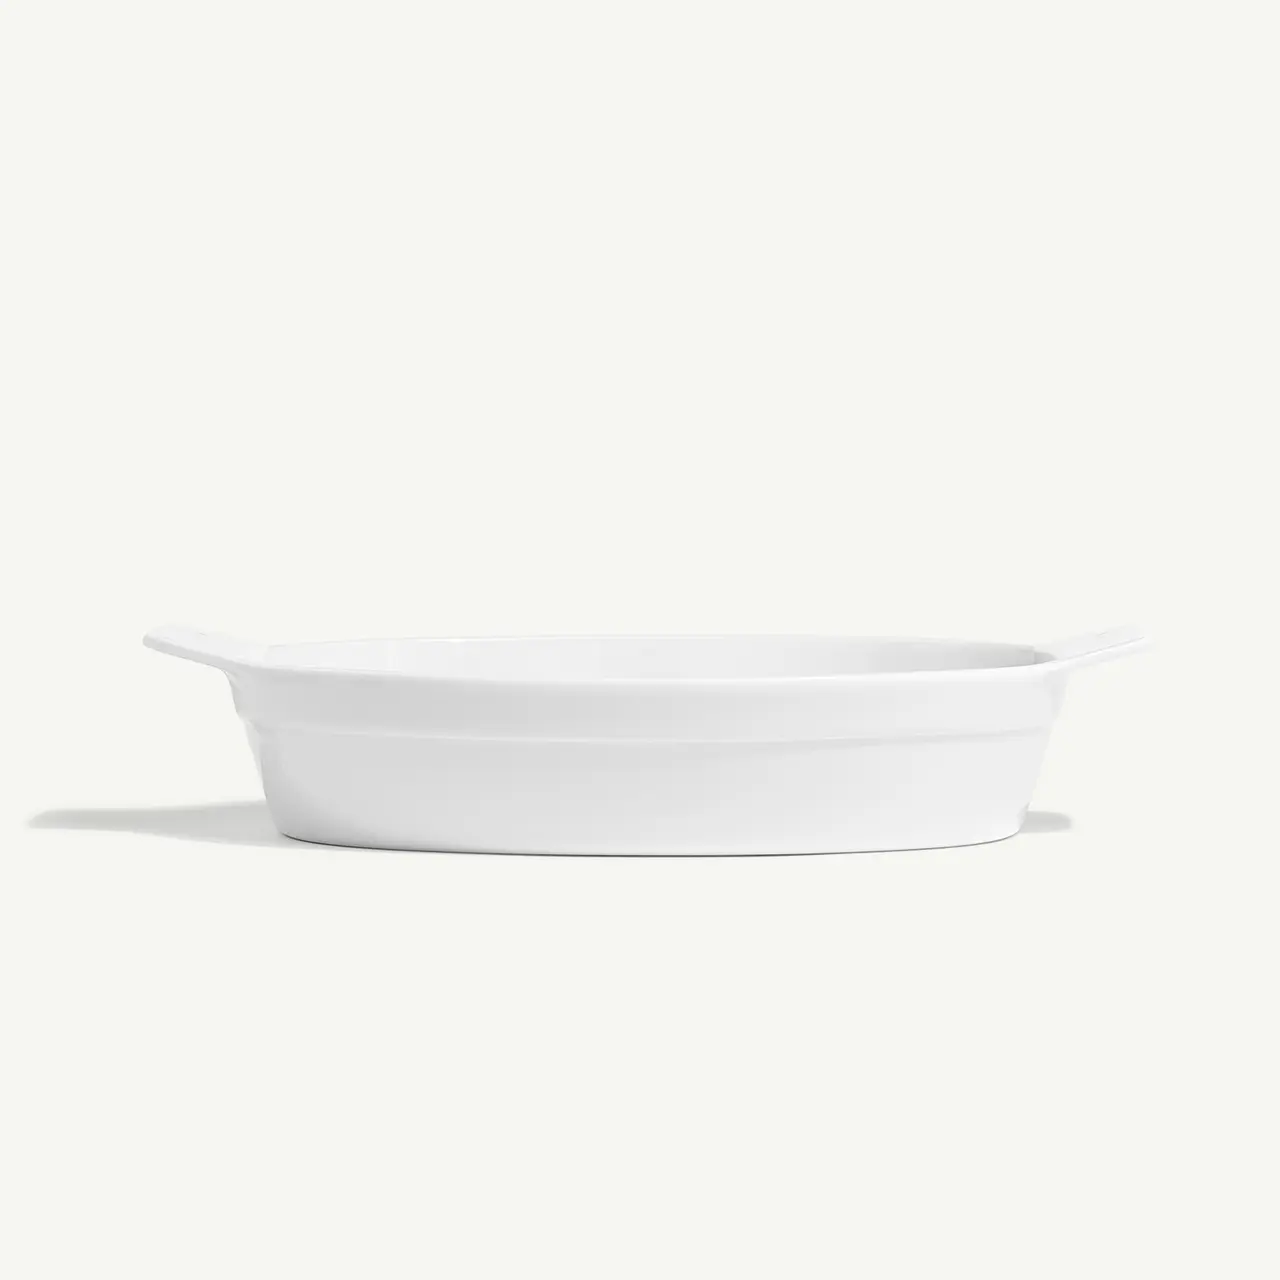 A simple white oval baking dish is displayed against a plain background.